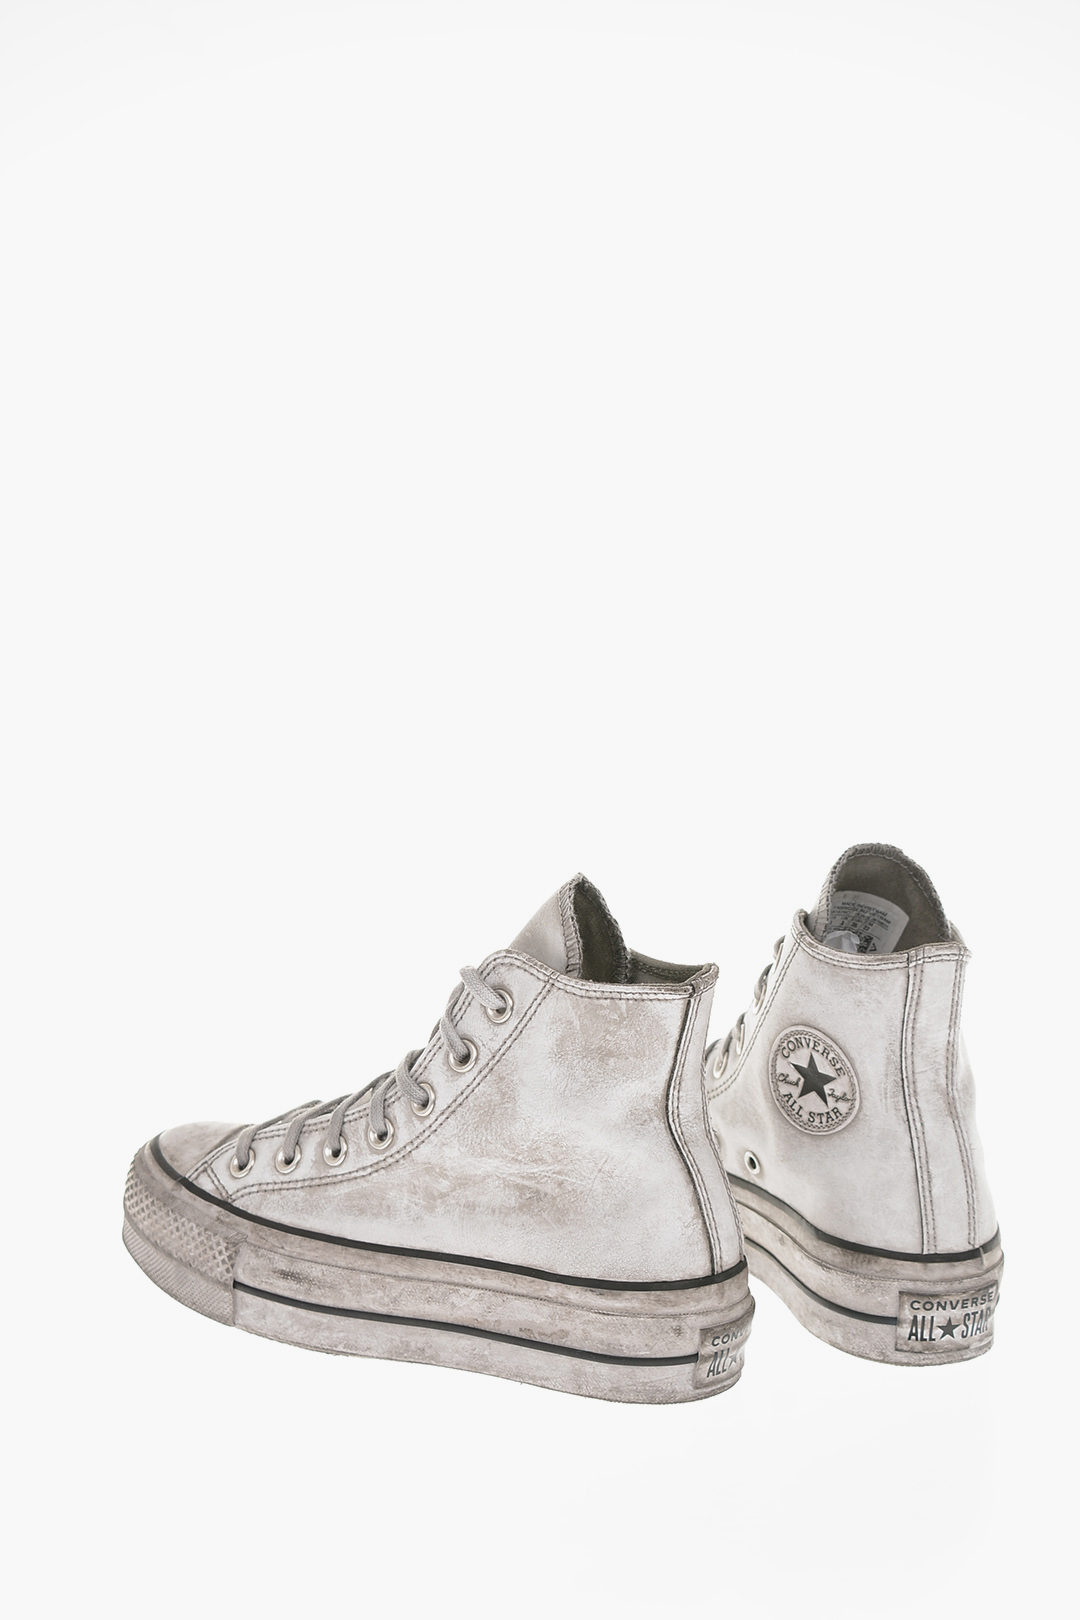 Converse CHUCK TAYLOR ALL STAR leather Vintage Effect High-top Sneakers  women - Glamood Outlet